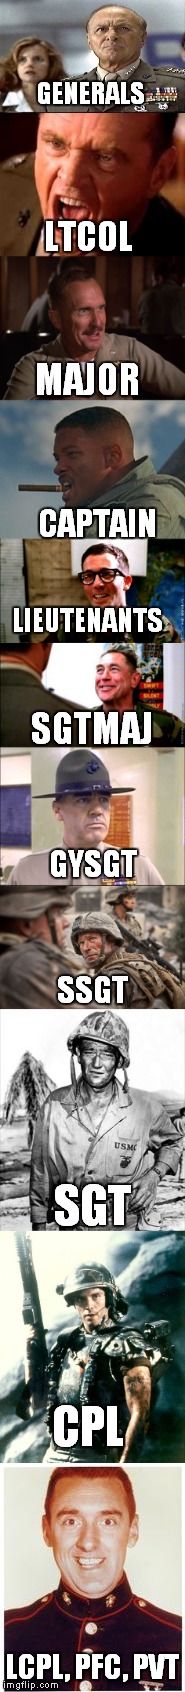 Marines, here's the rank structure! | GENERALS; LTCOL; MAJOR; CAPTAIN; LIEUTENANTS; SGTMAJ; GYSGT; SSGT; SGT; CPL; LCPL, PFC, PVT | image tagged in meme,funny,marines | made w/ Imgflip meme maker